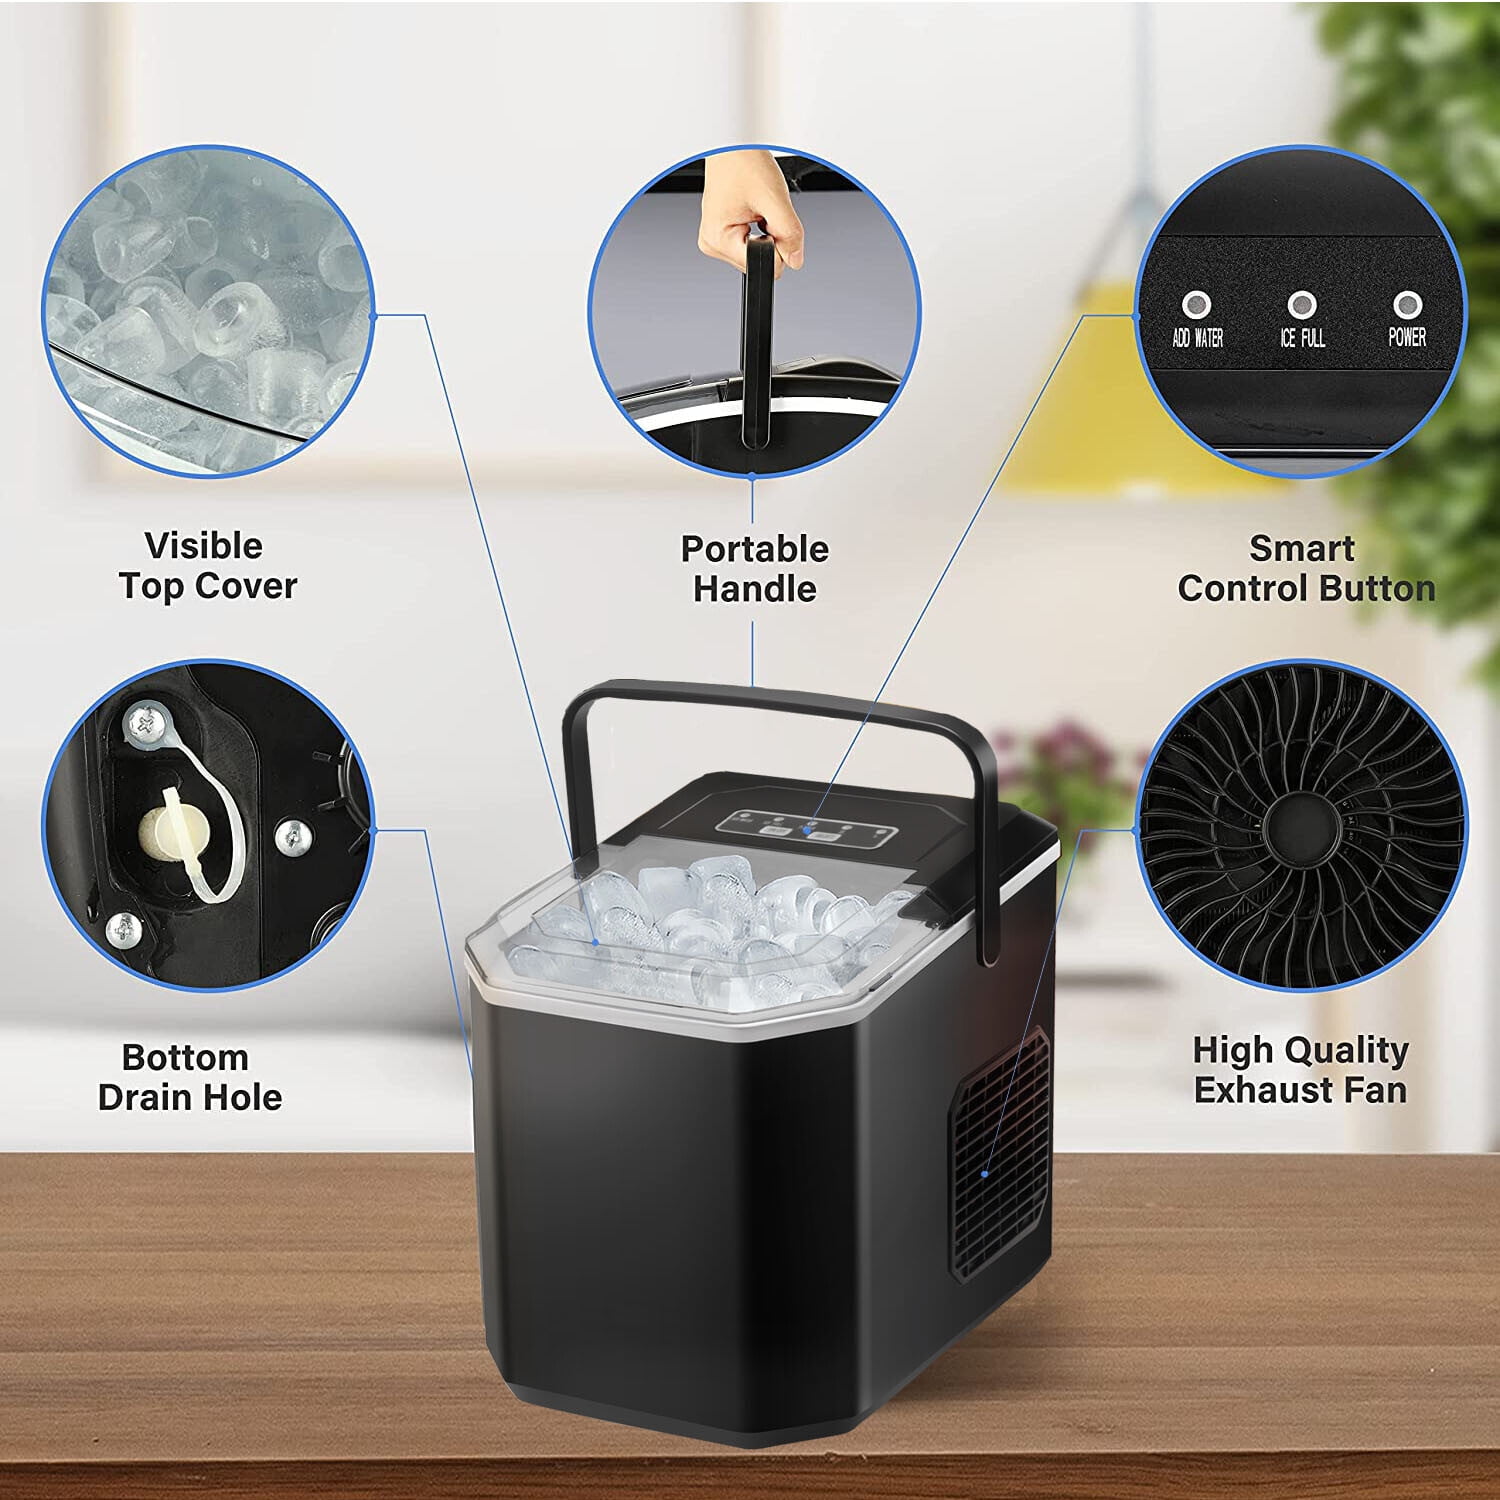 Famistar Portable Countertop Nugget Ice Maker , 55Lbs/24H Sonic Ice Maker,  Quick Ice in 7 Mins, 2 Water Inlet Modes, Self-Cleaning, Chewable Nugget Ice  Maker Machine for Home Office Bar Cofe 